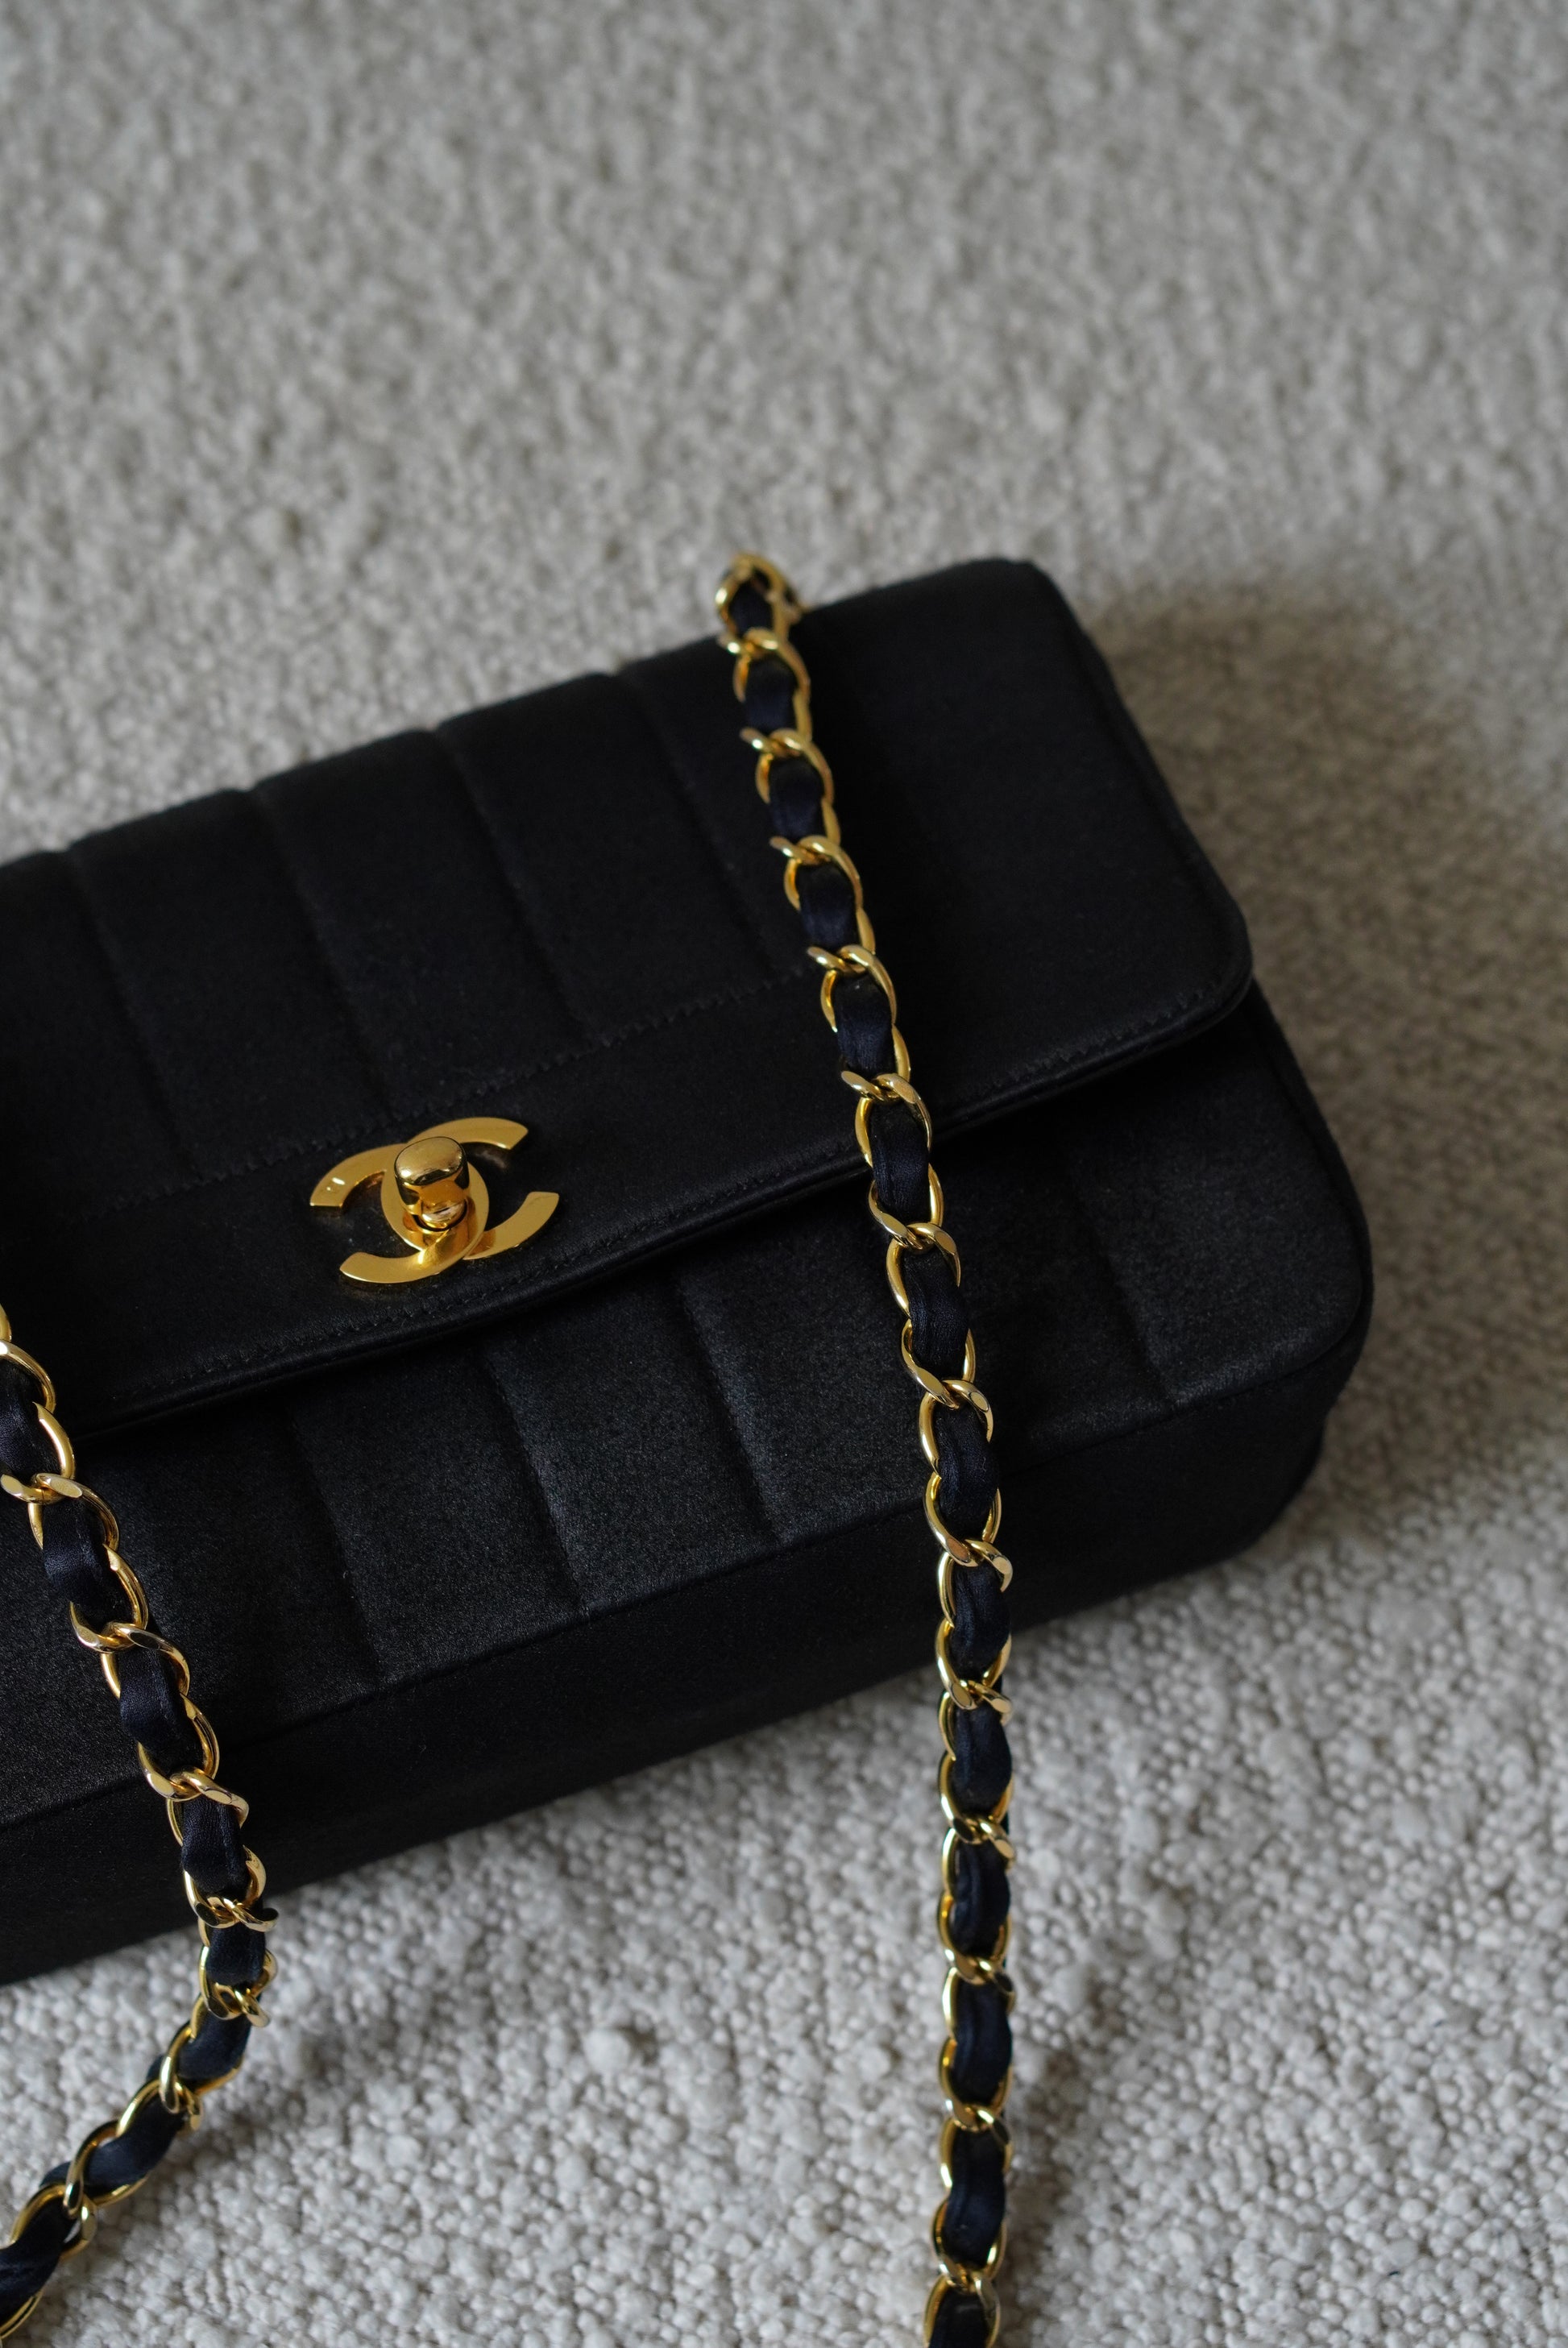 chanel classic wallets